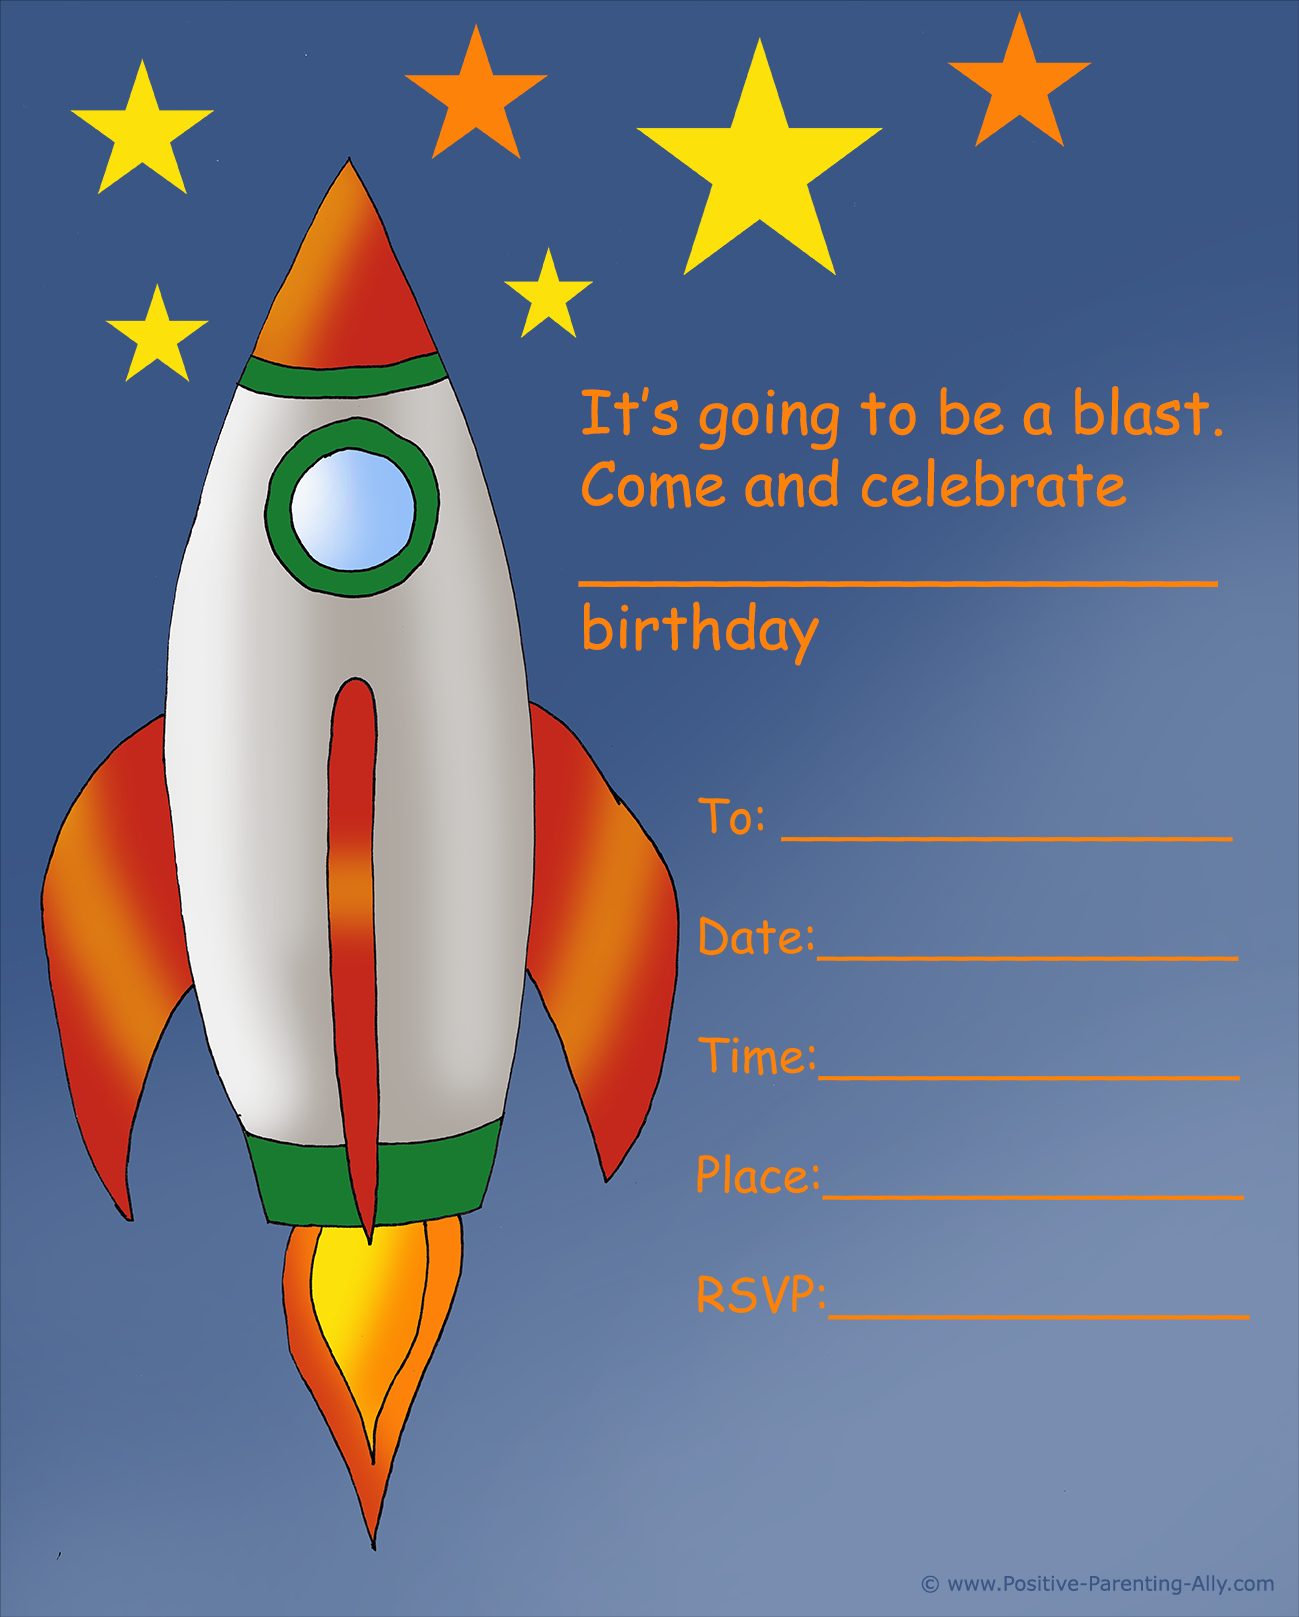 Free birthday invitations with a space rocket.